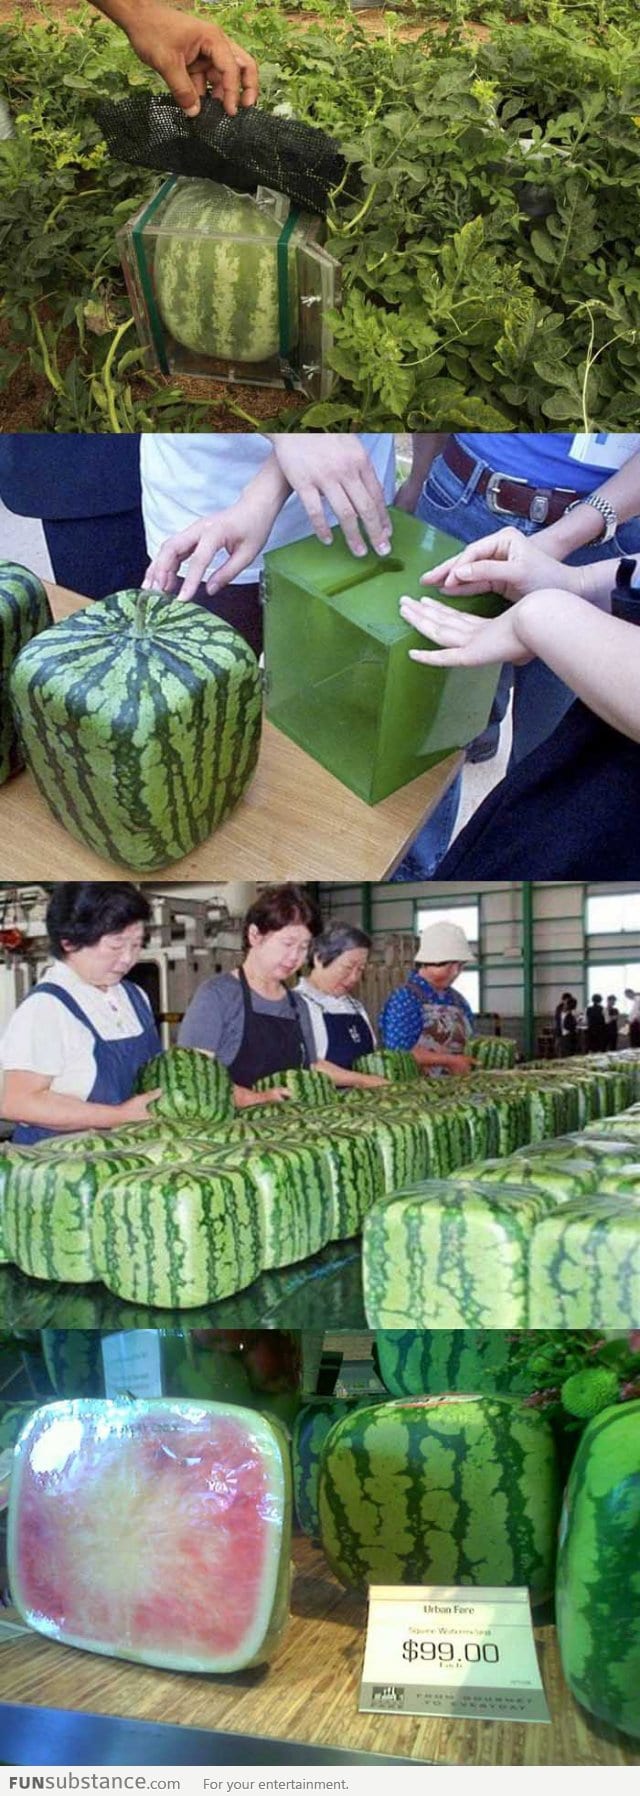 Square Watermelons Made in Japan